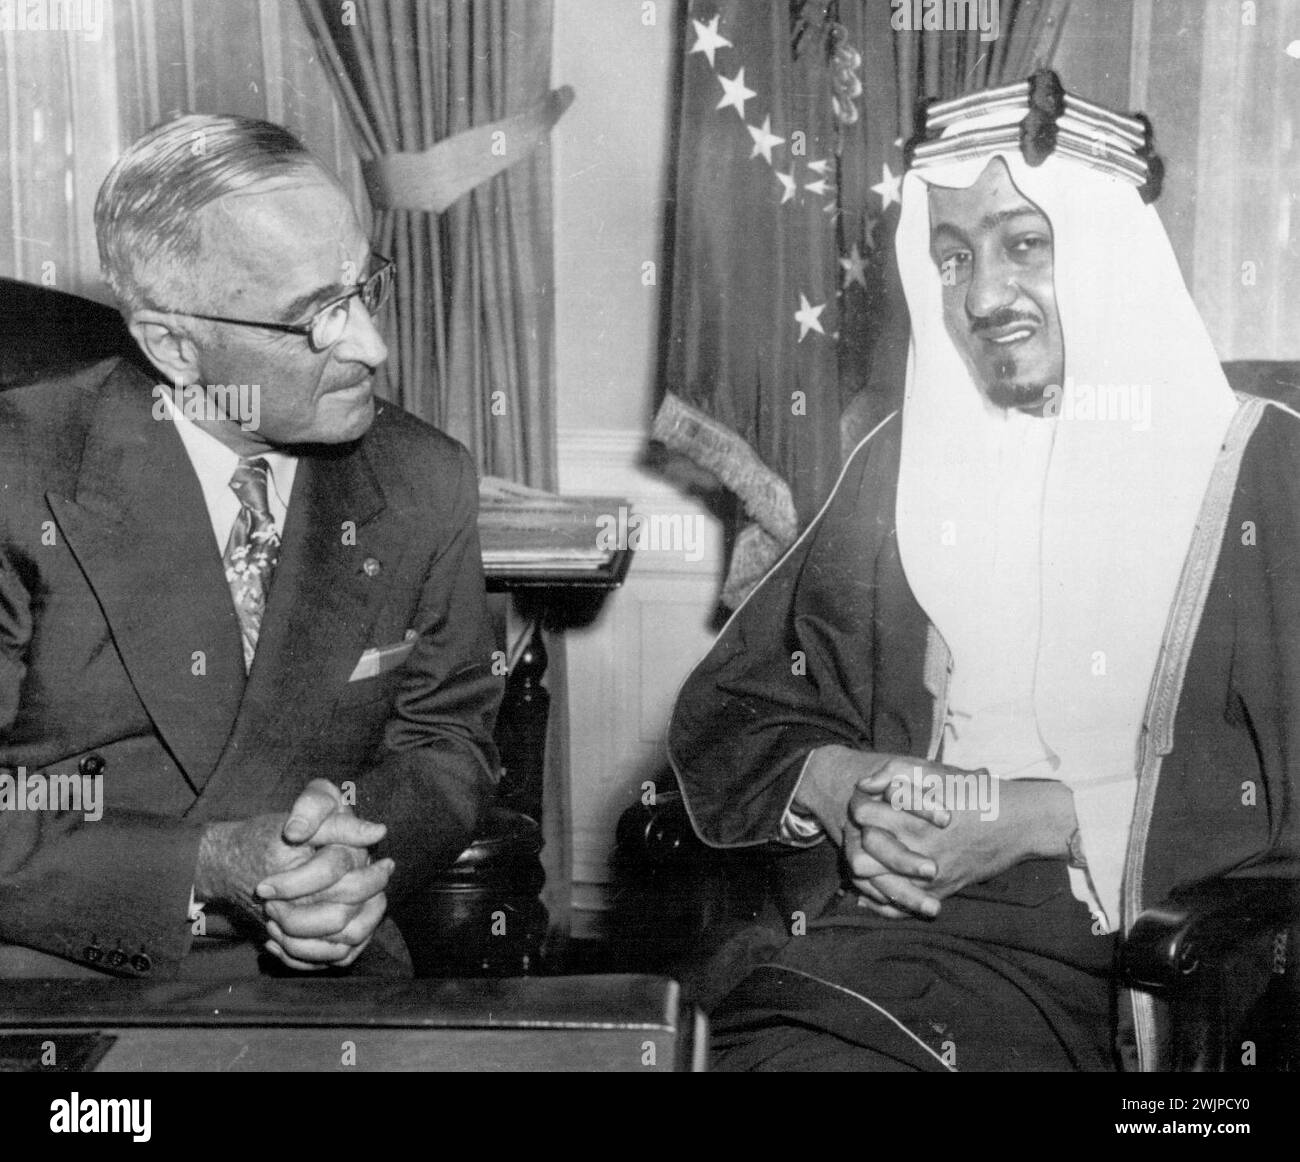 Arabian Prince Visits President -- Prince Abdullah Feisal, Minister of Interior and Public Health of Saudi Arabia talks with President Truman at the White House today. He is on a tour of the United States. August 18, 1952. (Photo by AP Wirephoto). Stock Photo